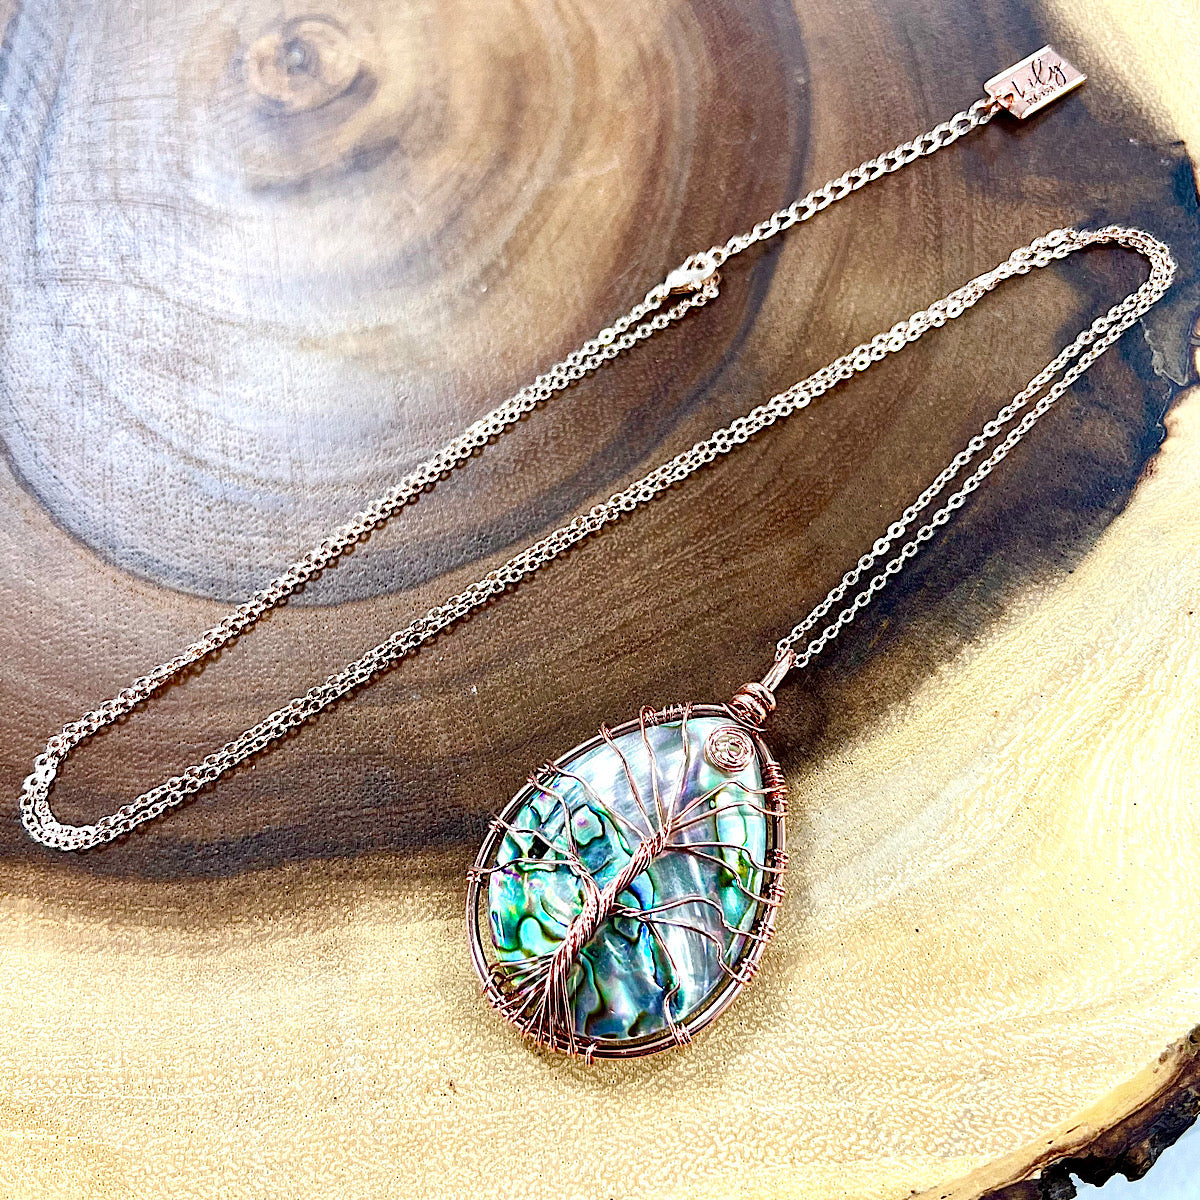 The Sydney Necklace- Crushed Abalone + Gold Leaf Flake Resin Necklace